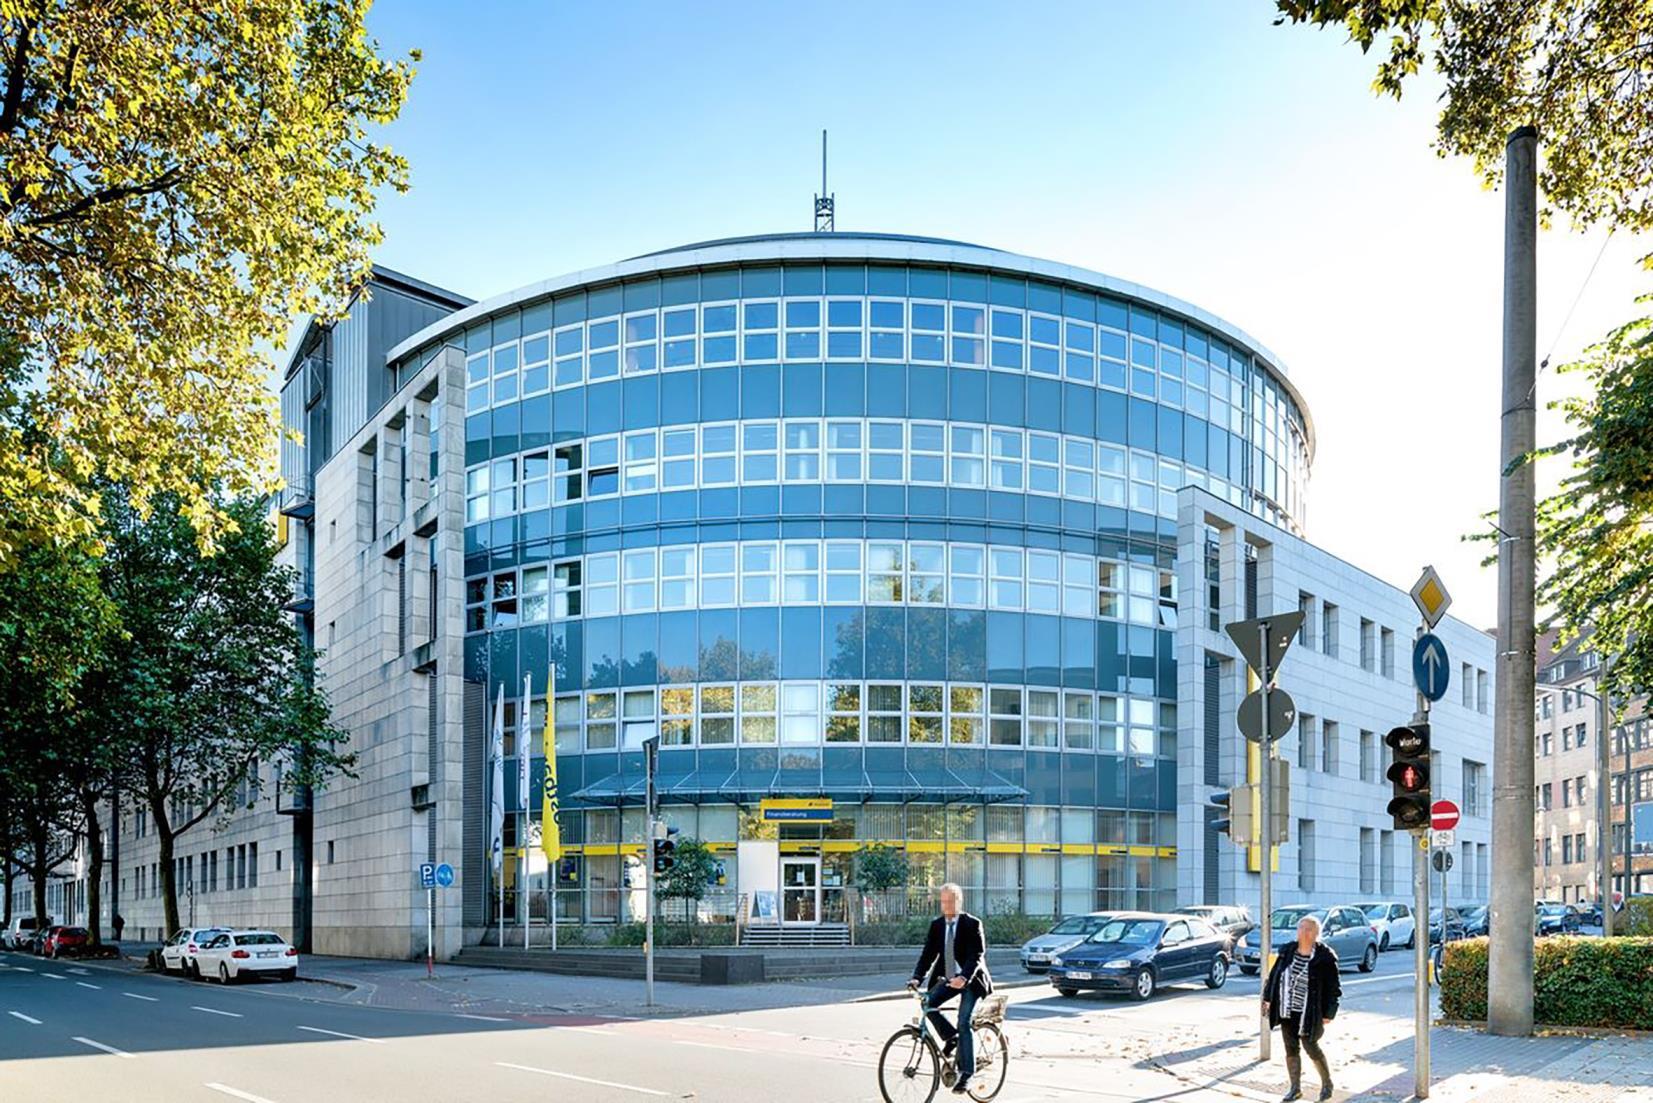 Cording buys 25,000sqm office complex in Dortmund for clients | News ...